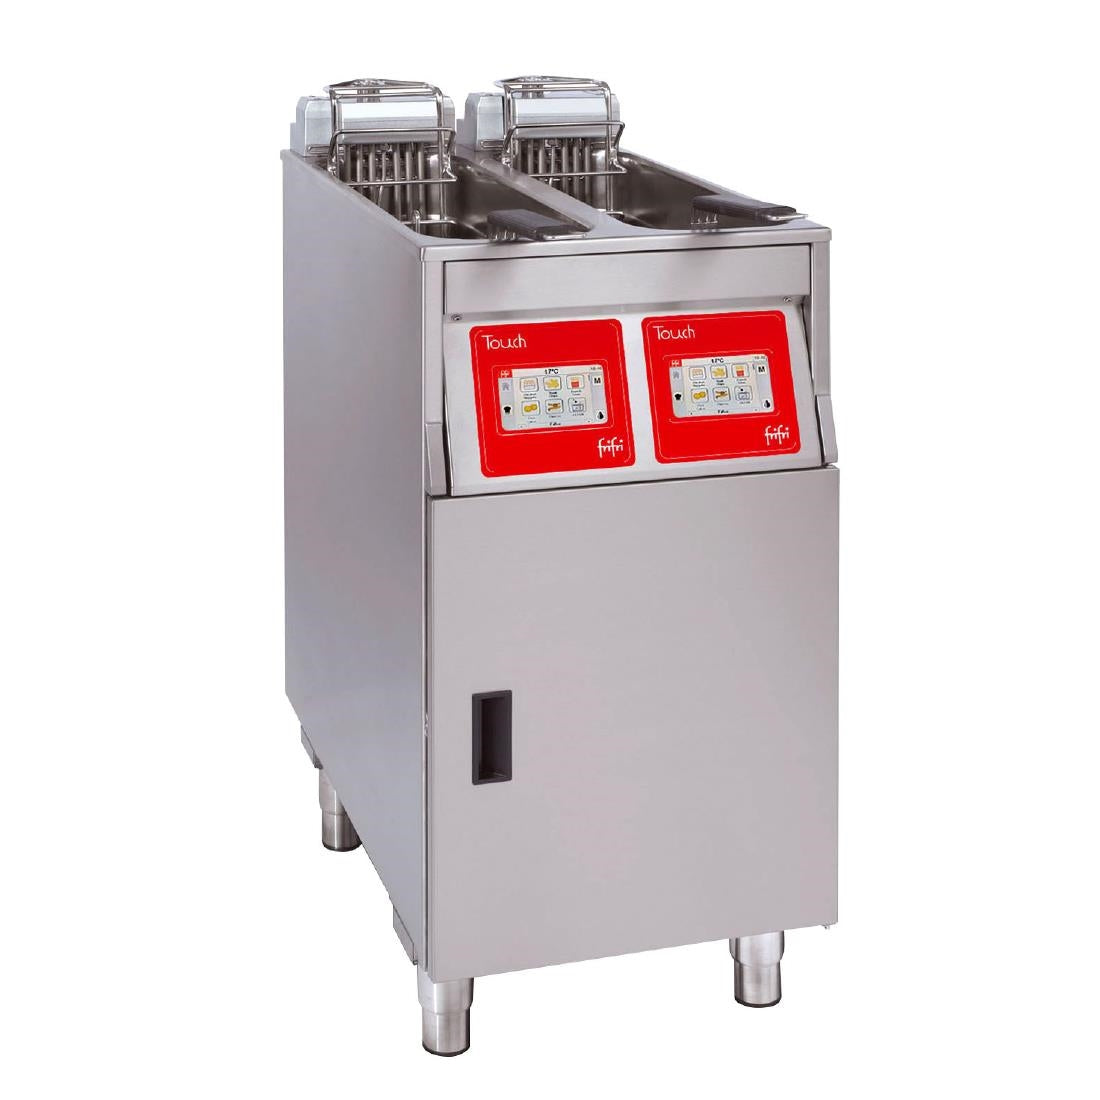 HS013-3PH FriFri Touch 422 Electric Free-Standing Twin Tank Fryer 2 Baskets 2x 9kW - Single Phase